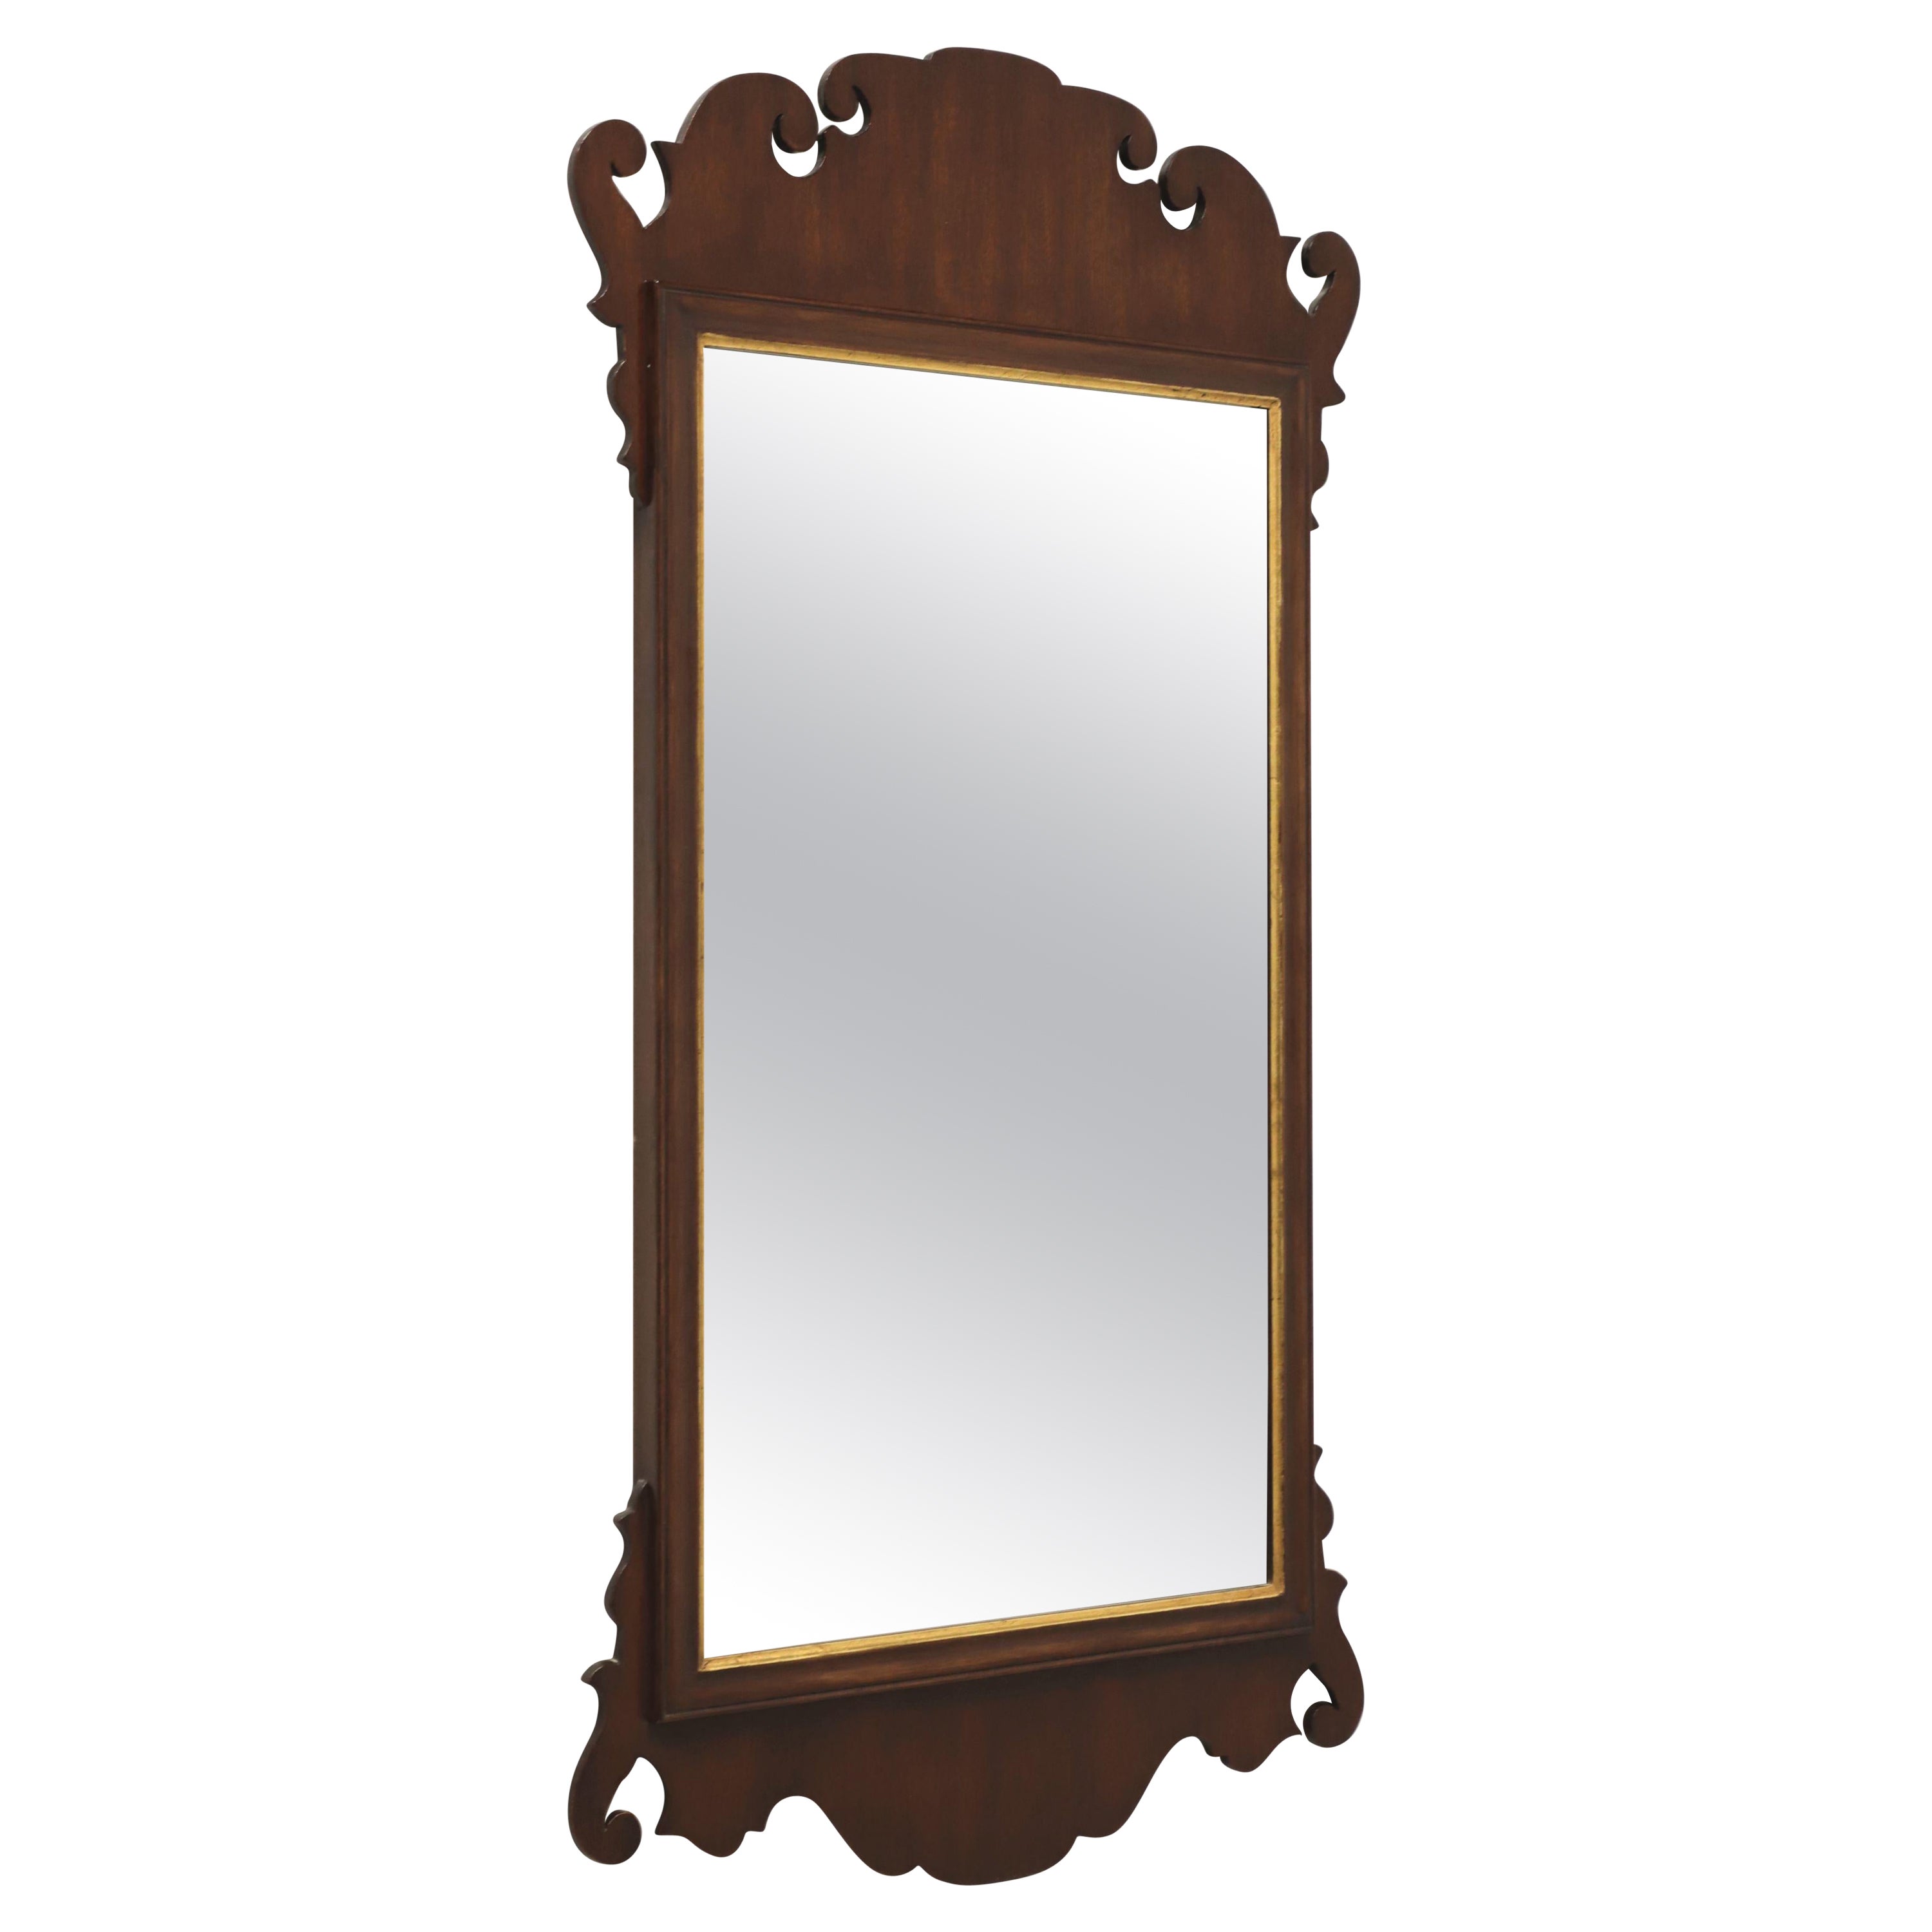 FRIEDMAN BROTHERS Mahogany Chippendale Style Beveled Wall Mirror